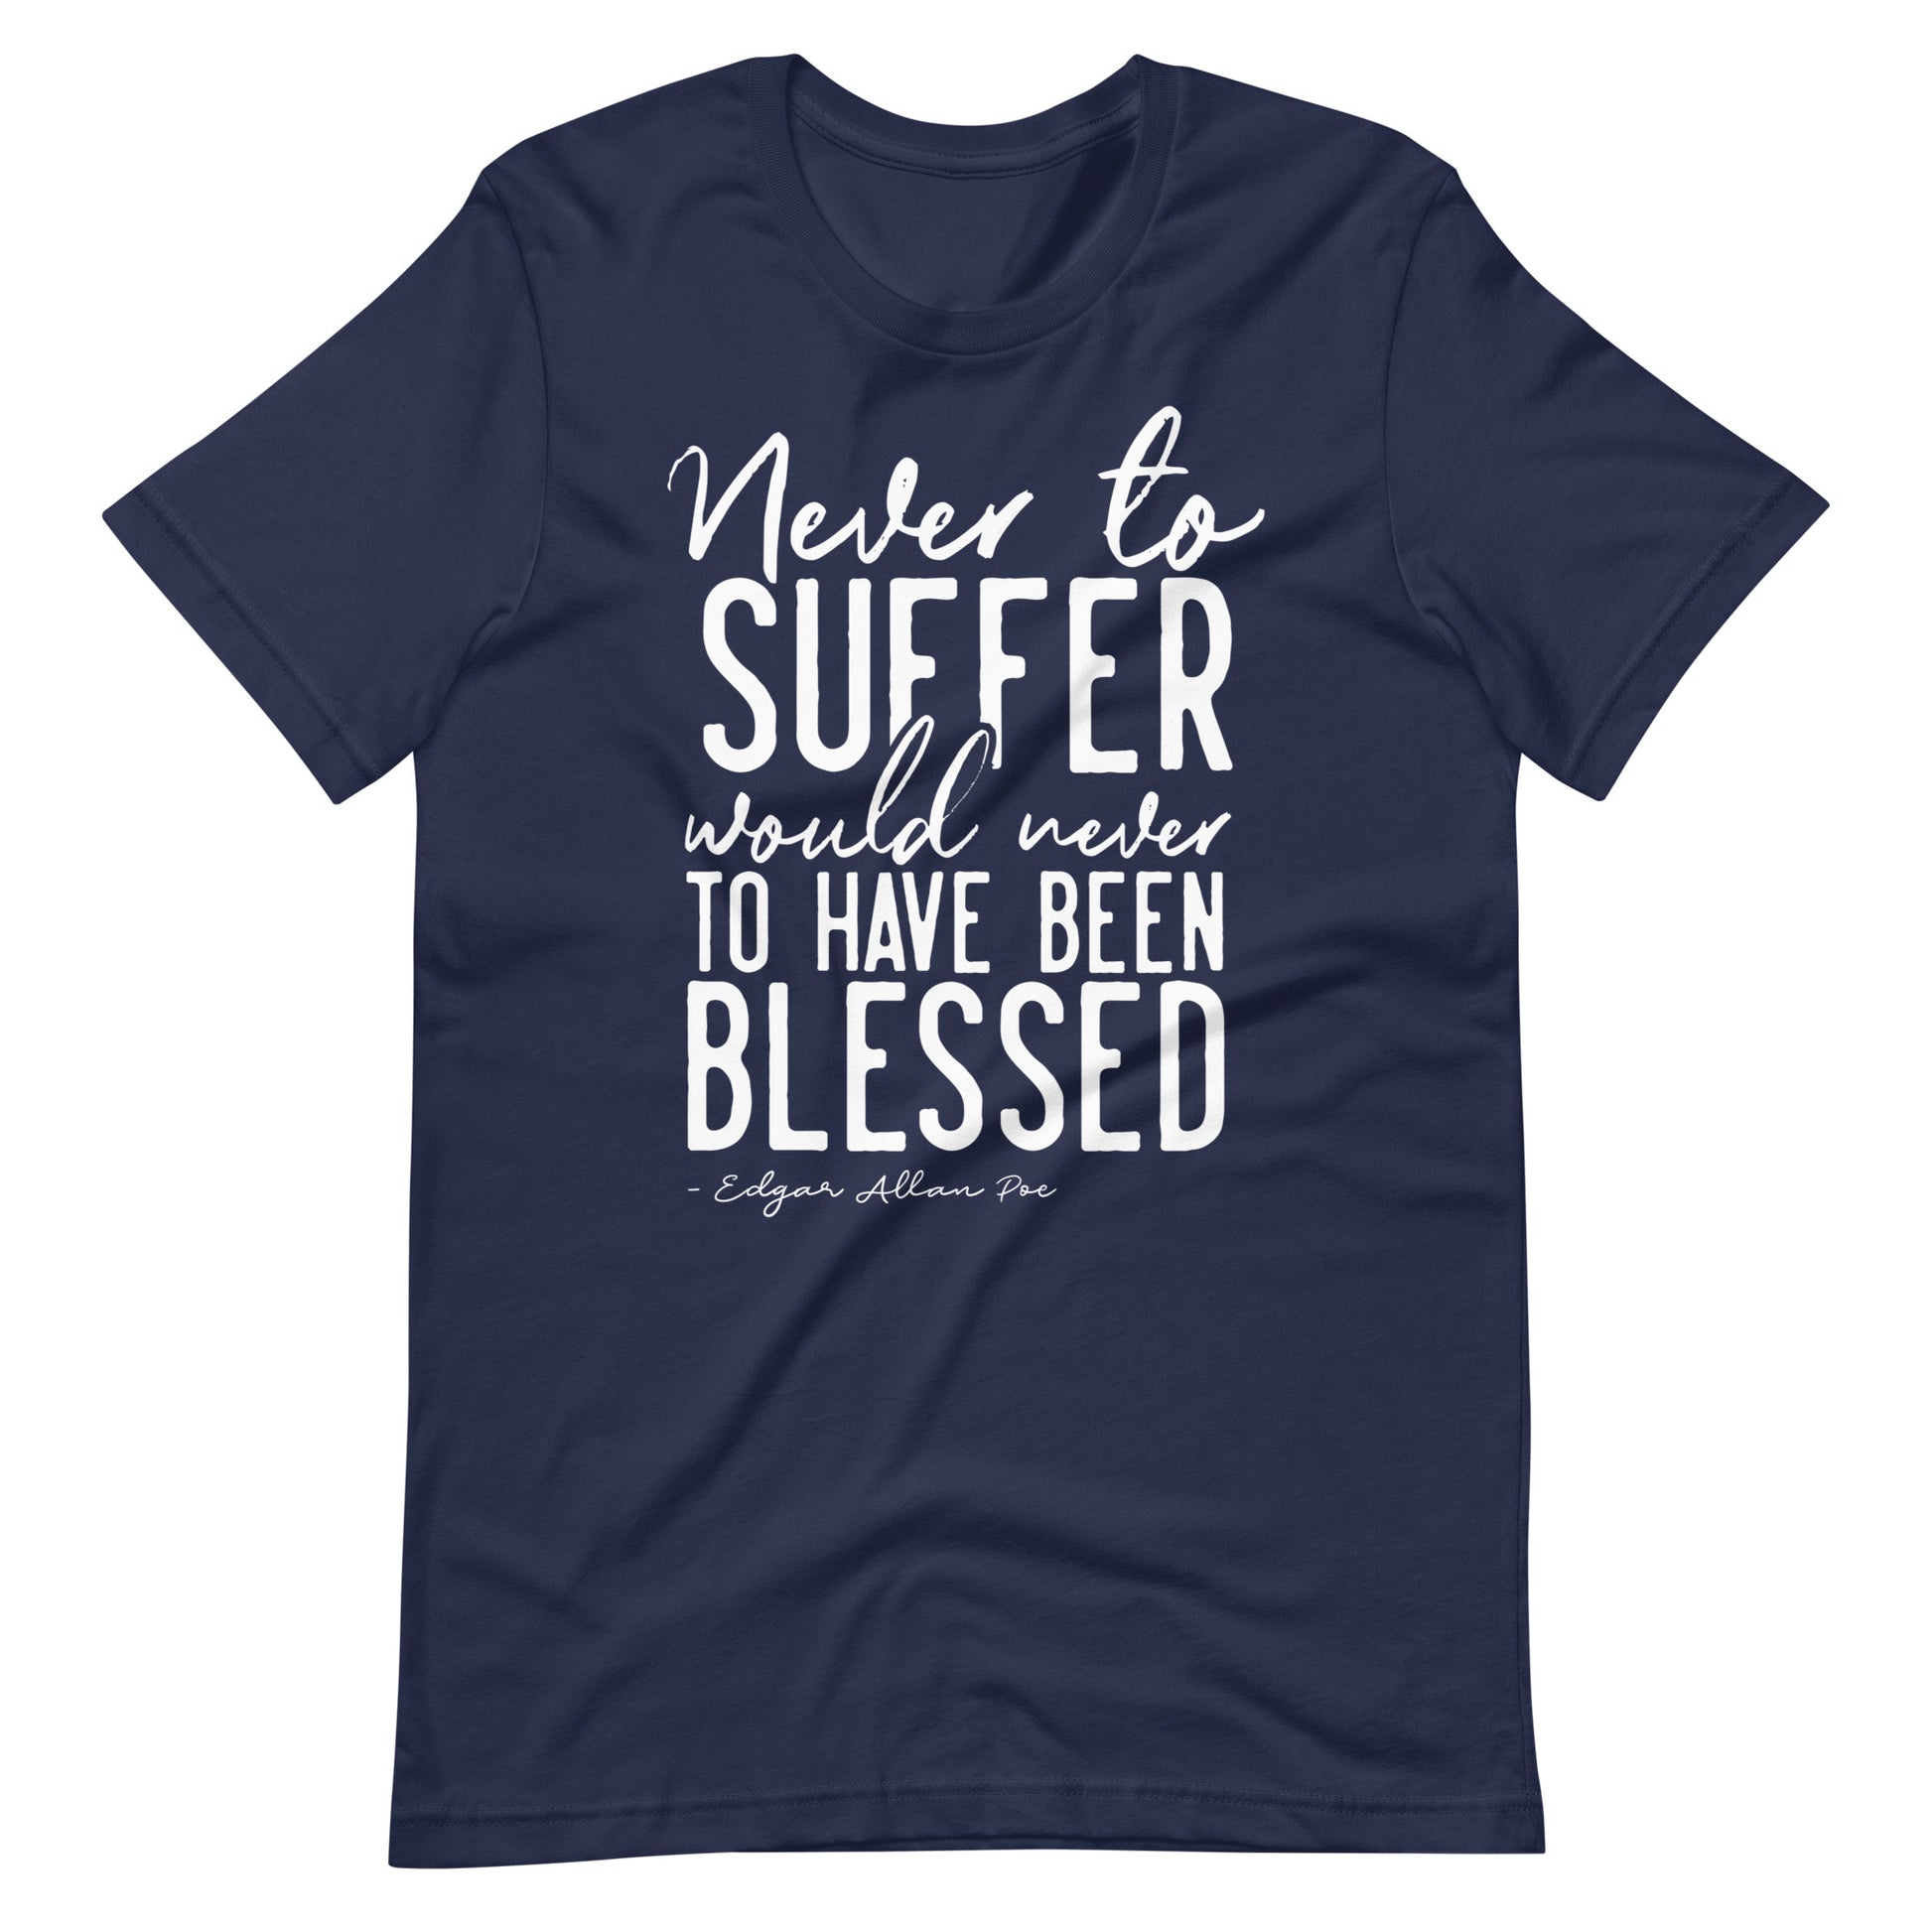 Never to Suffer Edgar Allan Poe Quote - Men's t-shirt - Navy Front